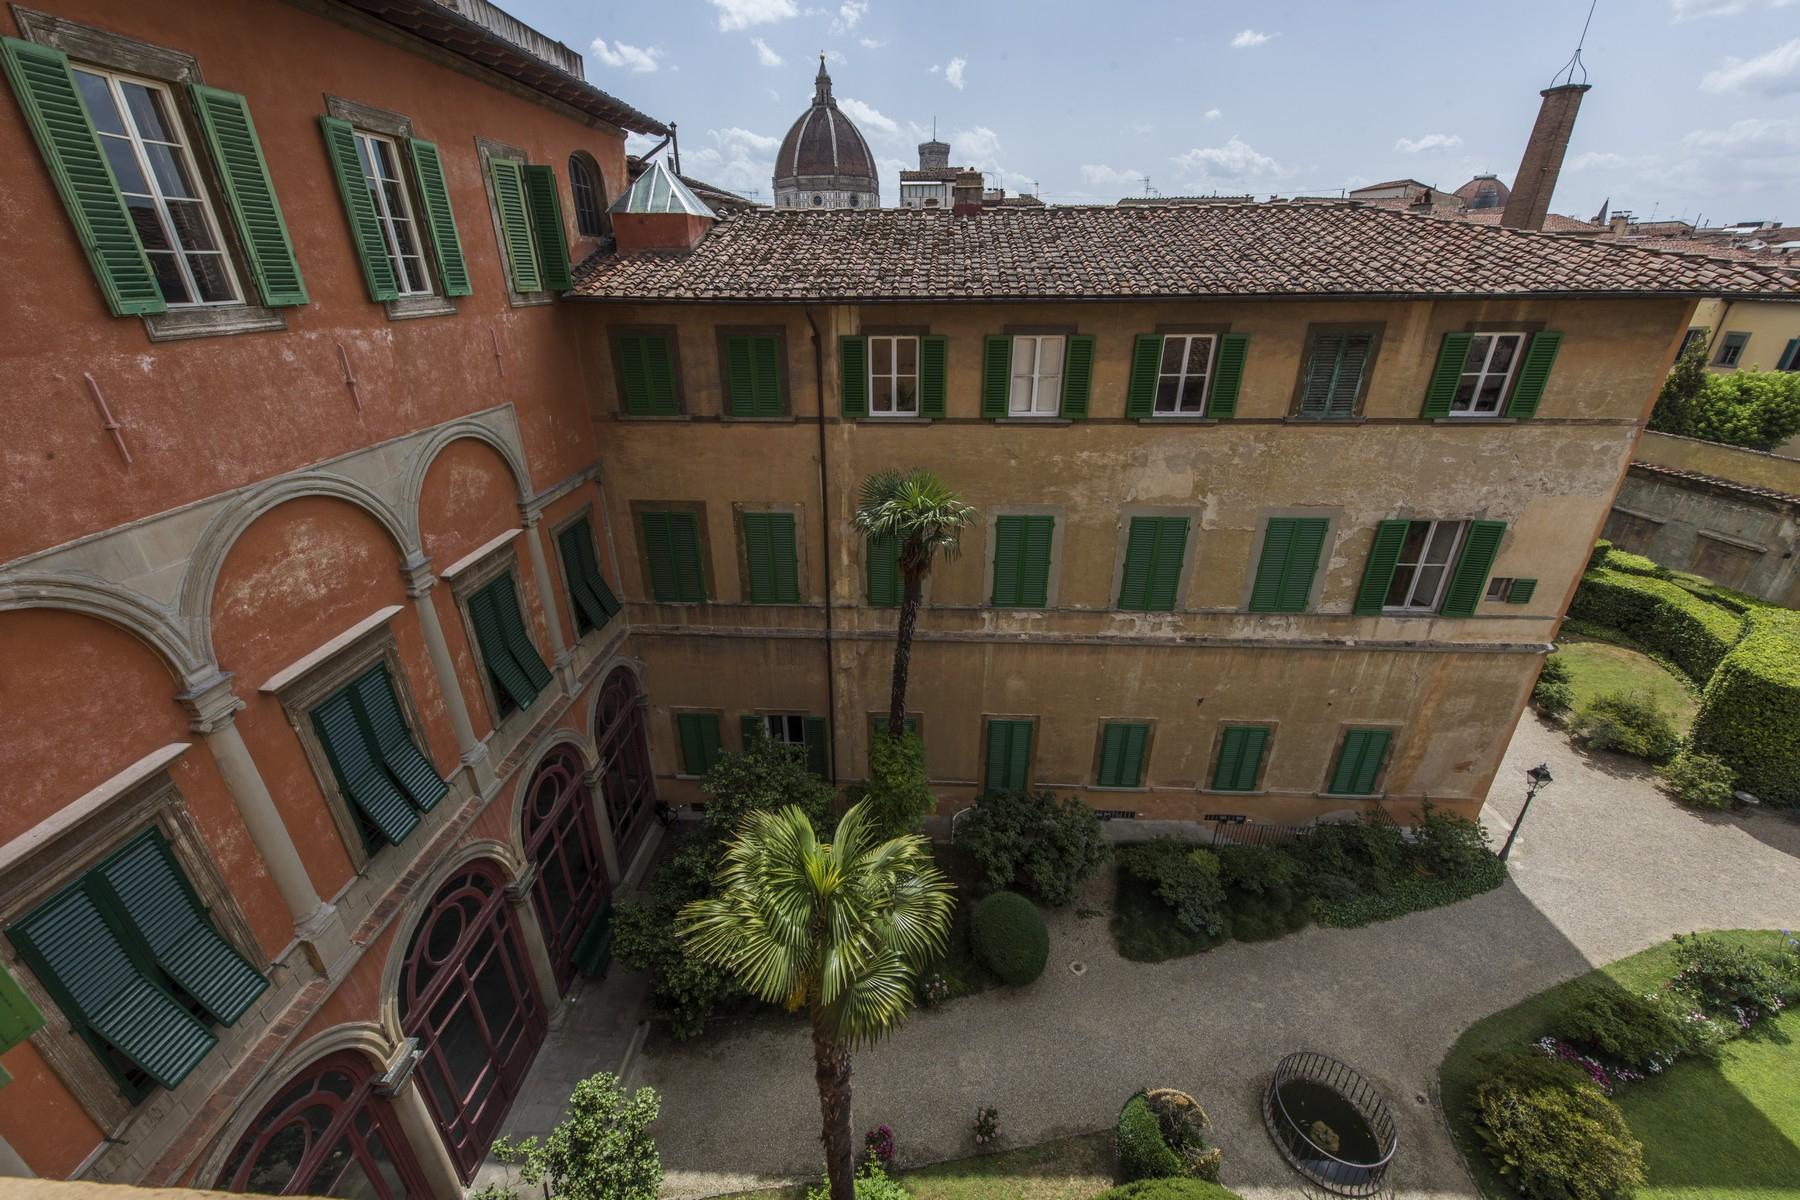 Magnificent 520sqm penthouse in a historic Florentine palazzo. - 21